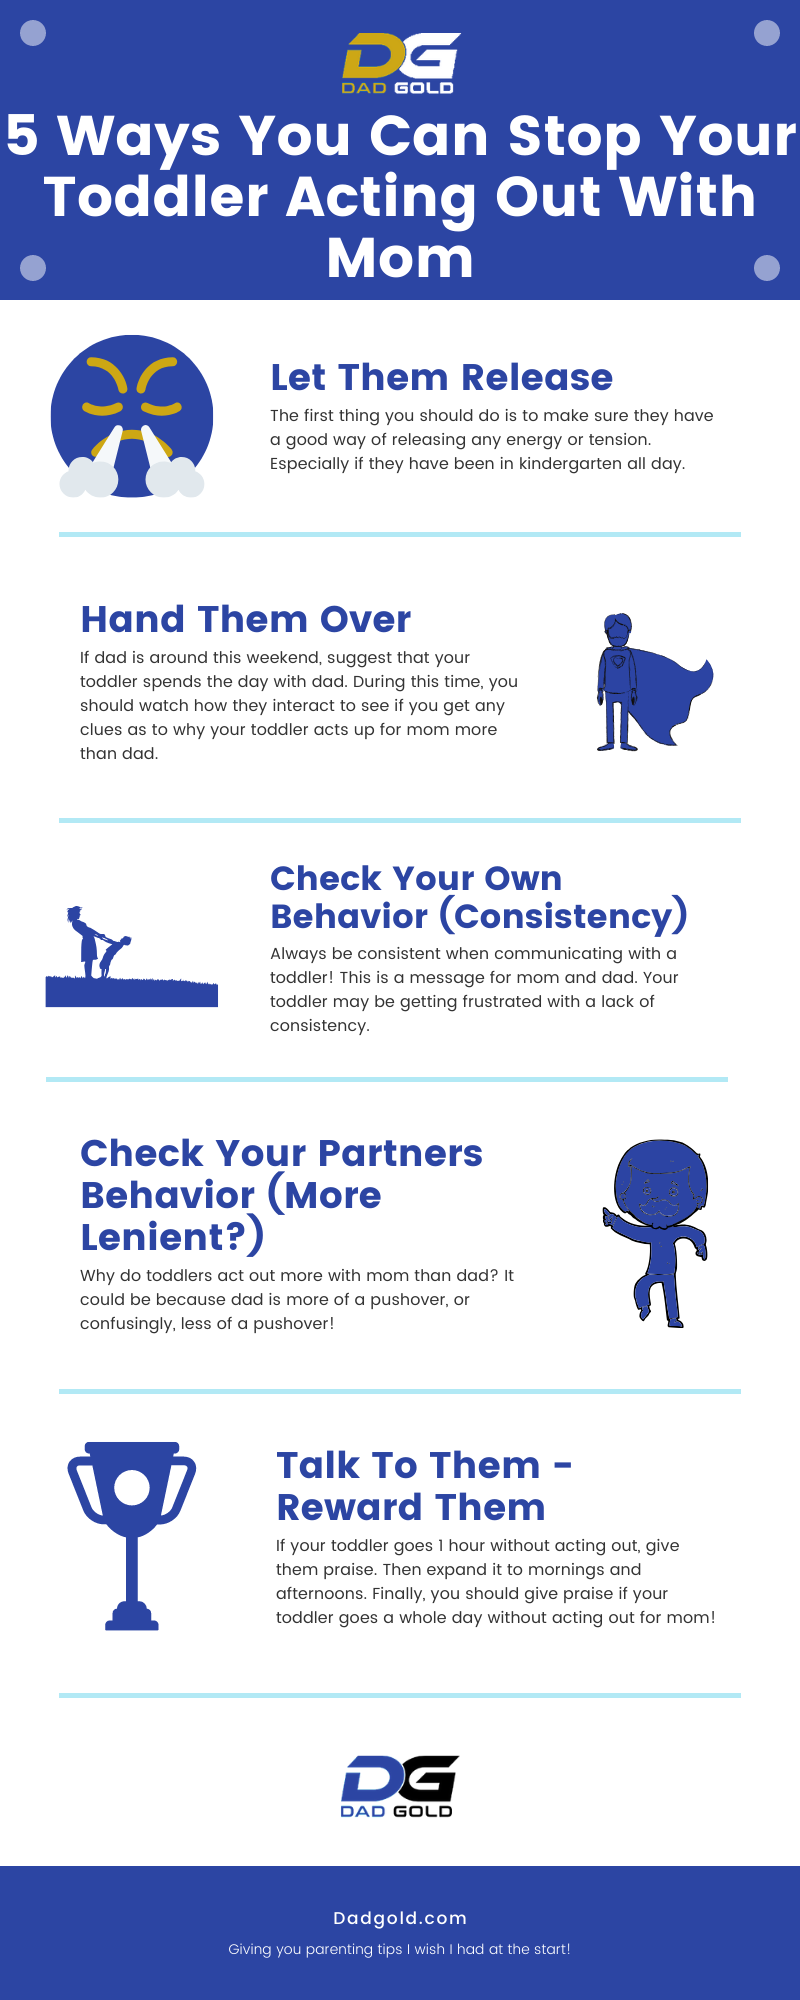 5 Ways You Can Stop Your Toddler Acting Out With Mom Infographic